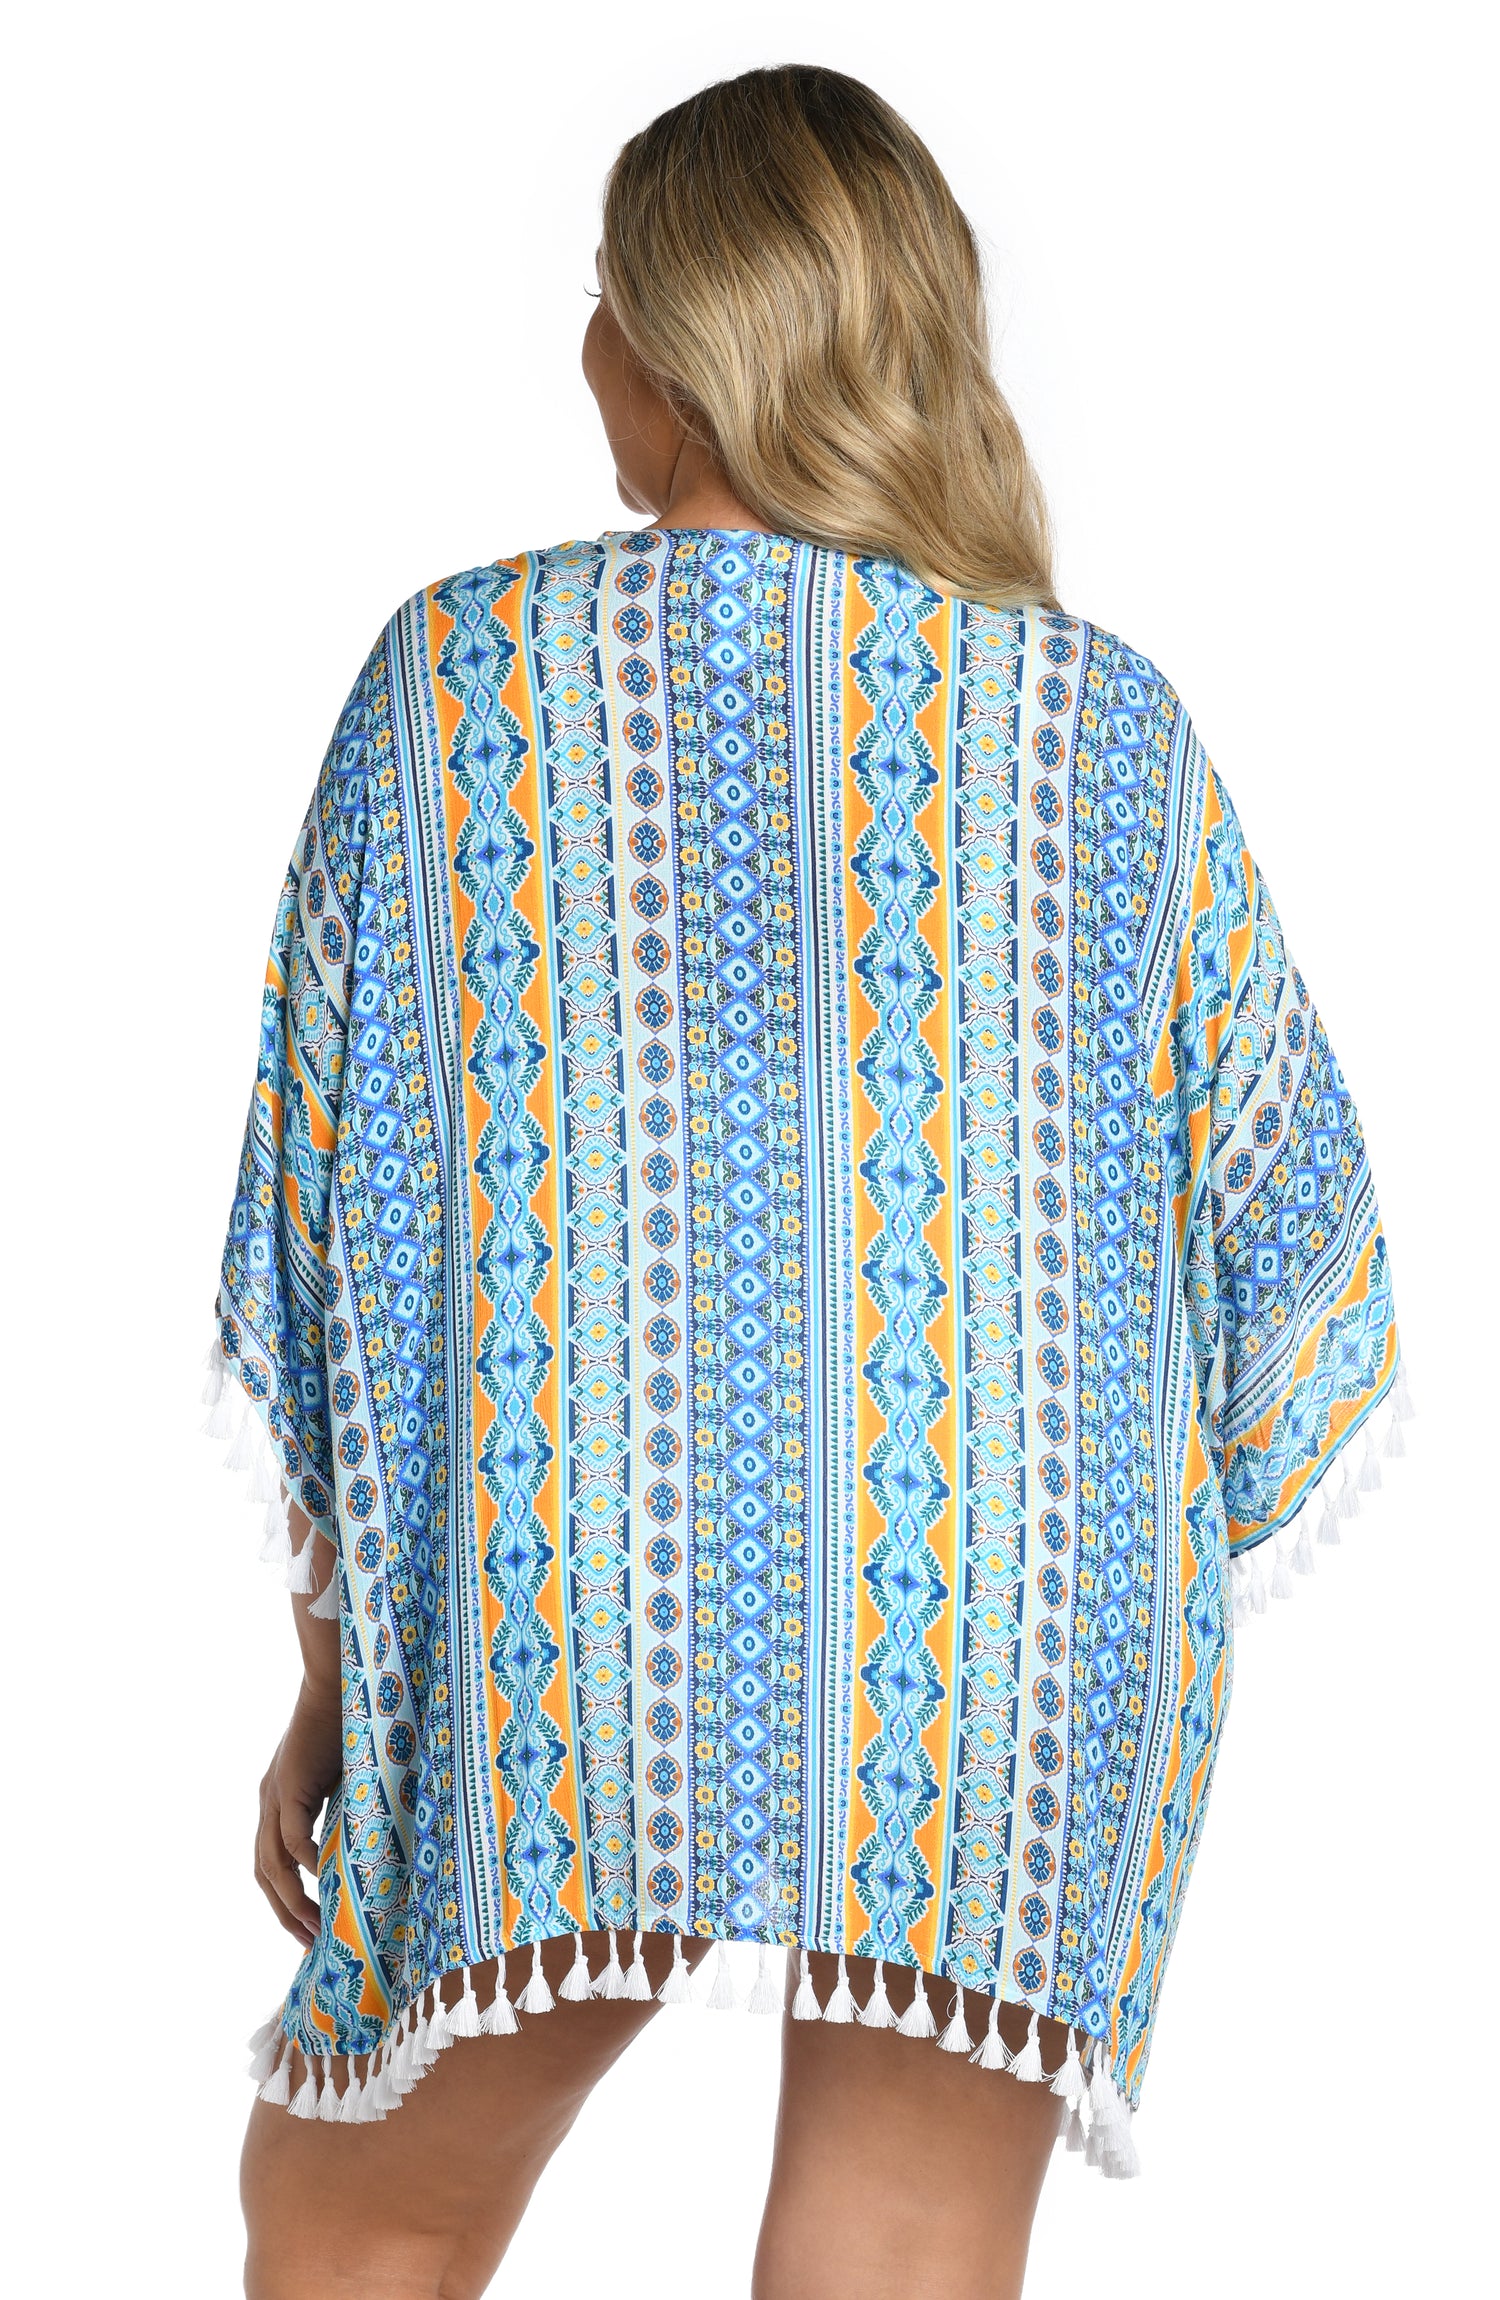 Model is wearing a blue multicolored mediterranean printed open front kimono cover up from our Scarf City collection.